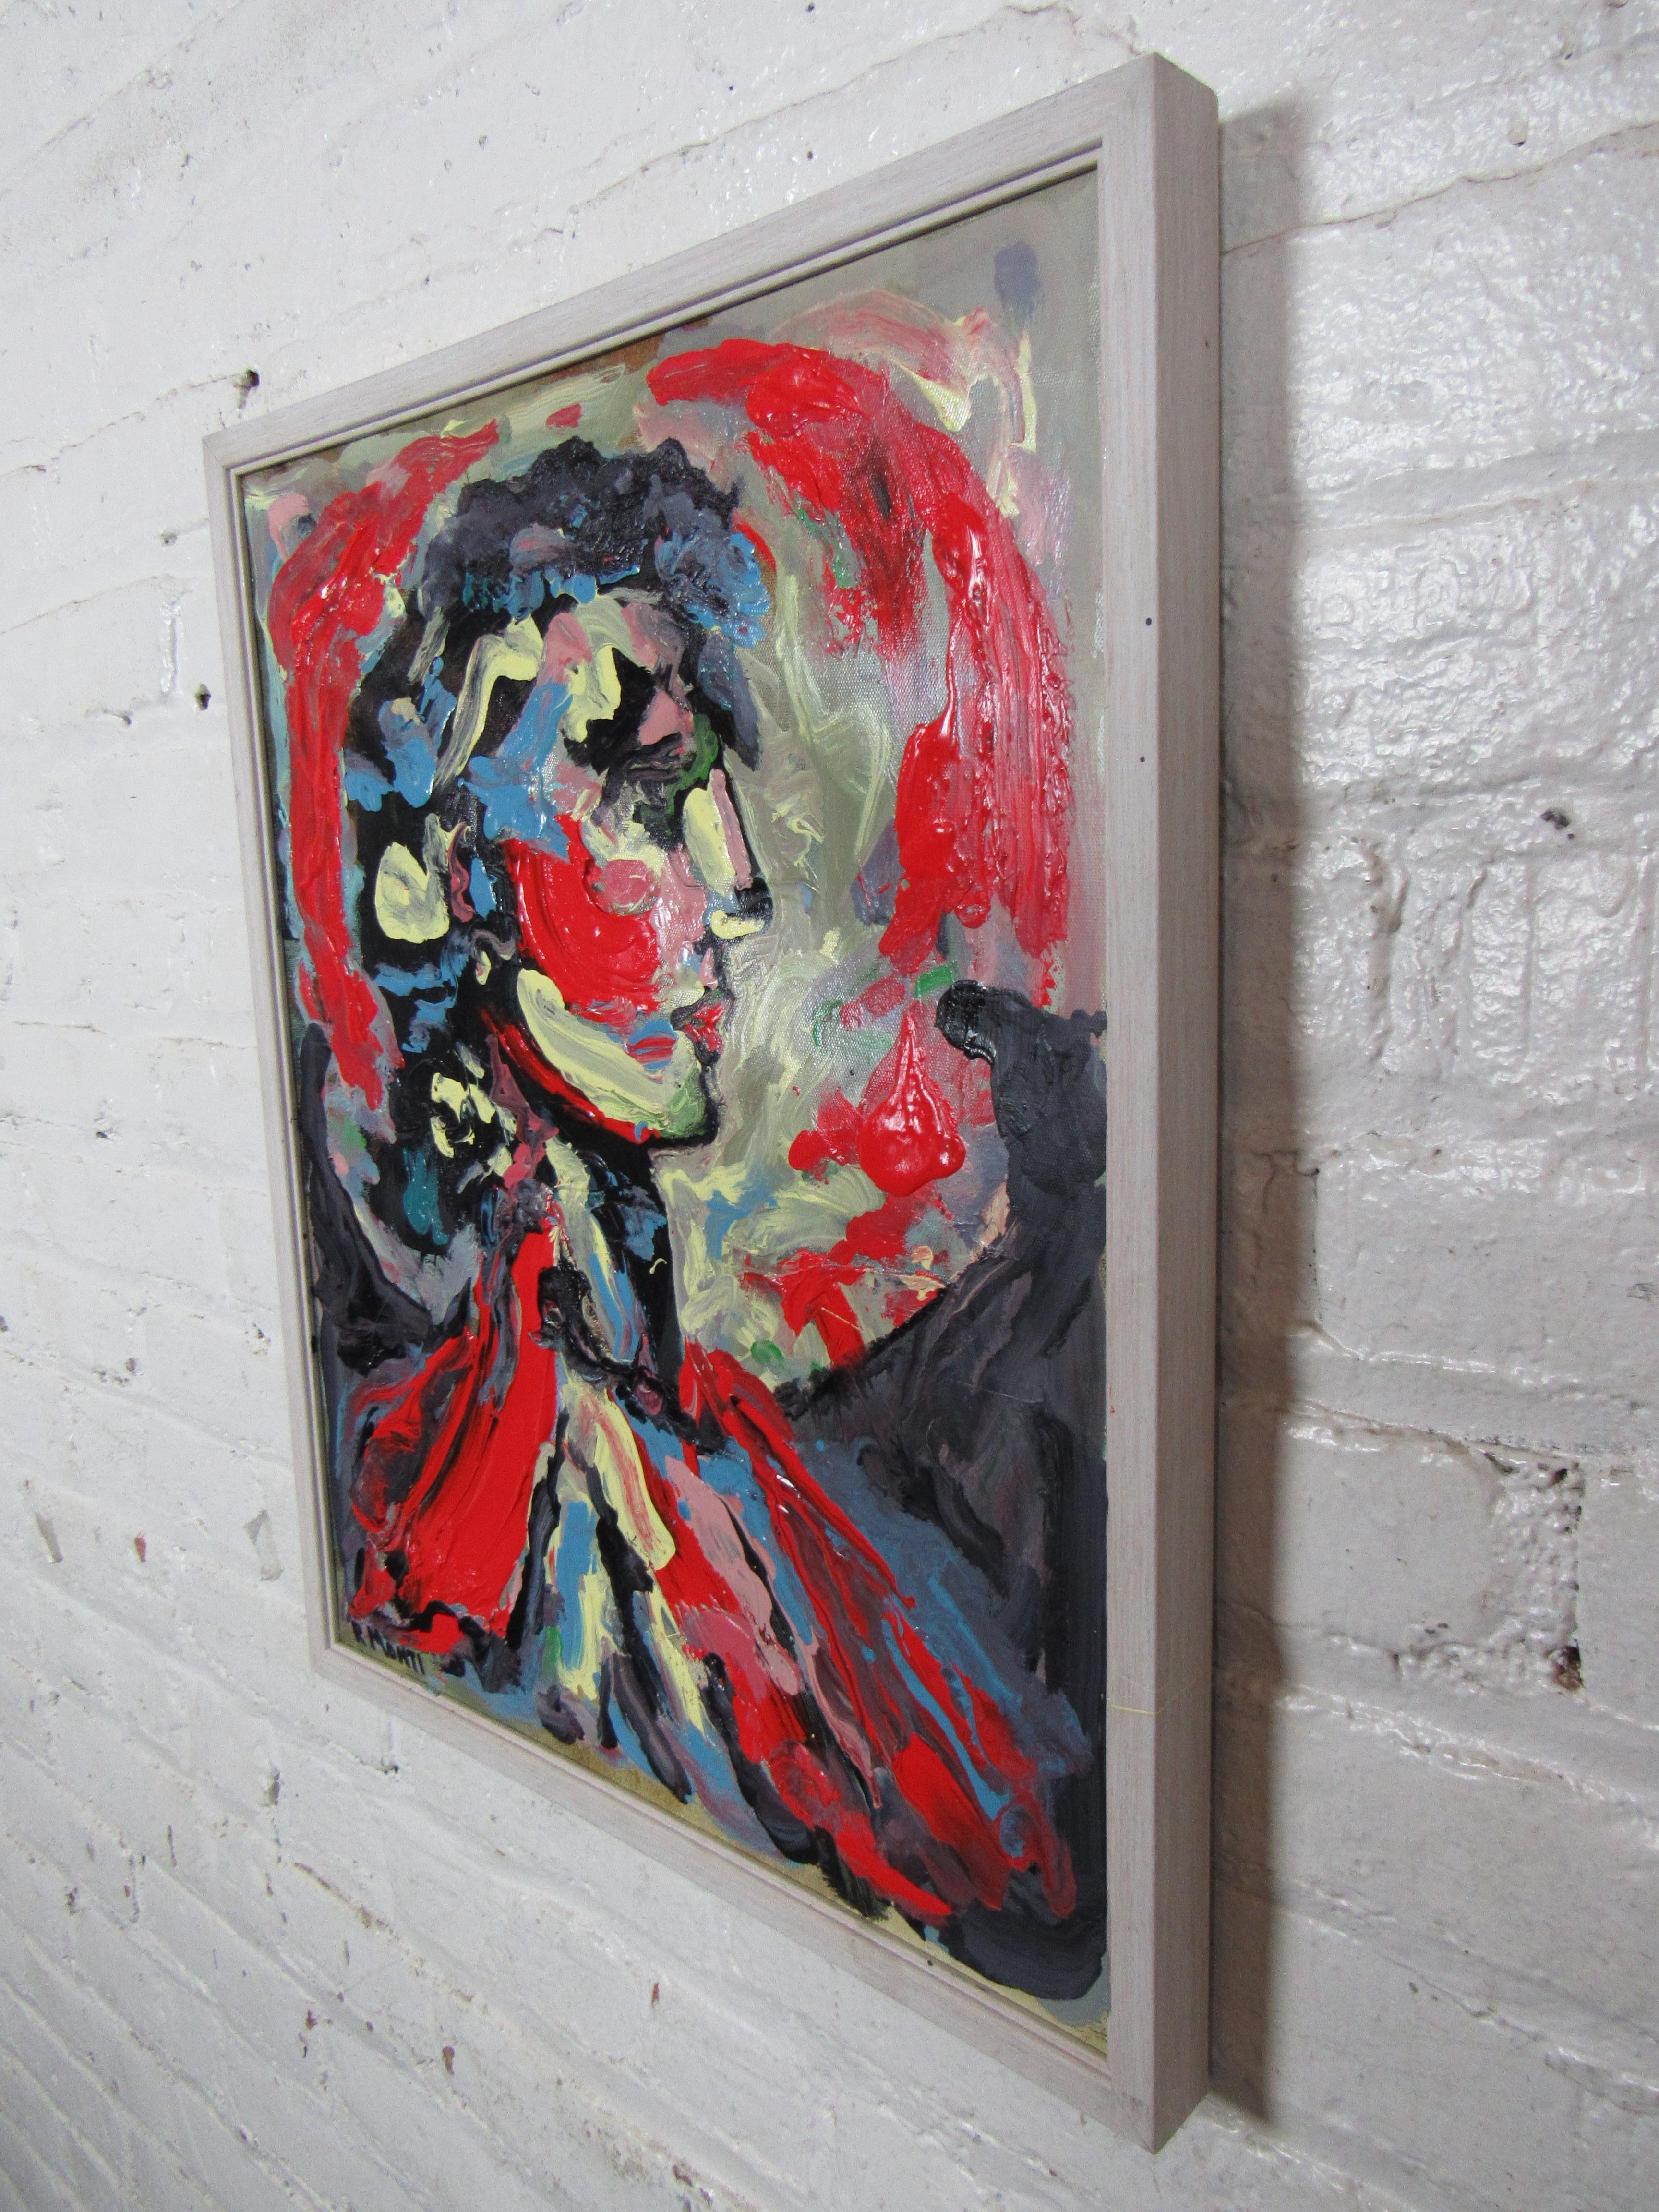 An abstracted portrait rendered in thick, rich strokes of oil paint, this signed painting by Pennsylvania-based artist R. Monti is bright and expressive. Please confirm item location with seller (NY/NJ).